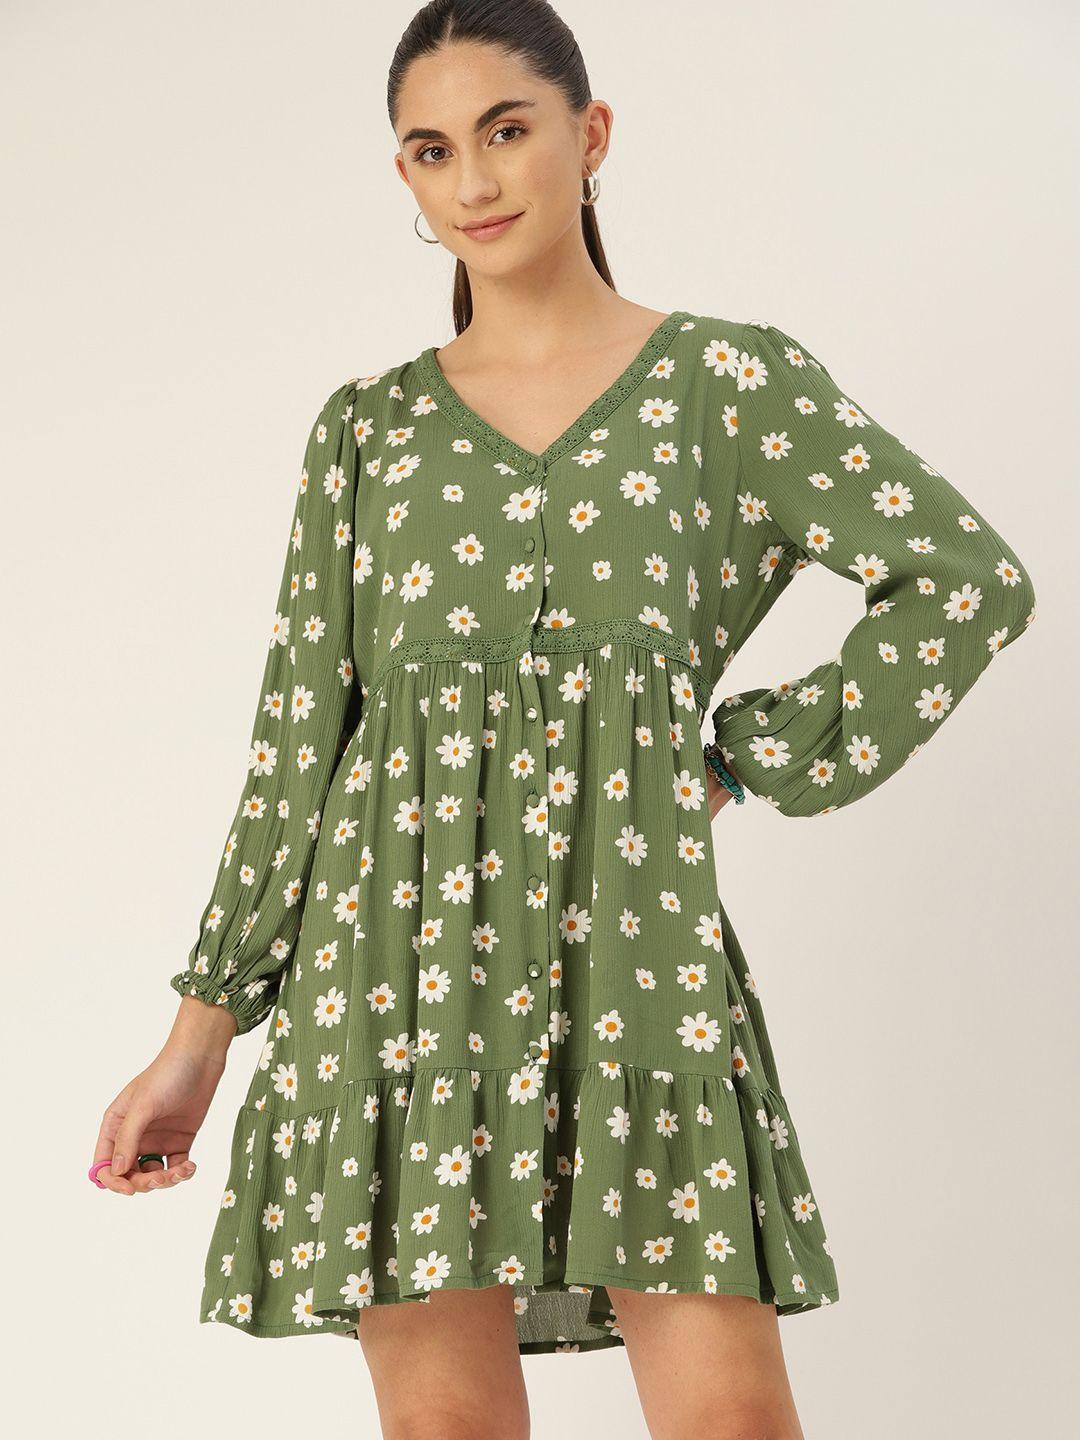 dressberry green & white floral printed a-line dress